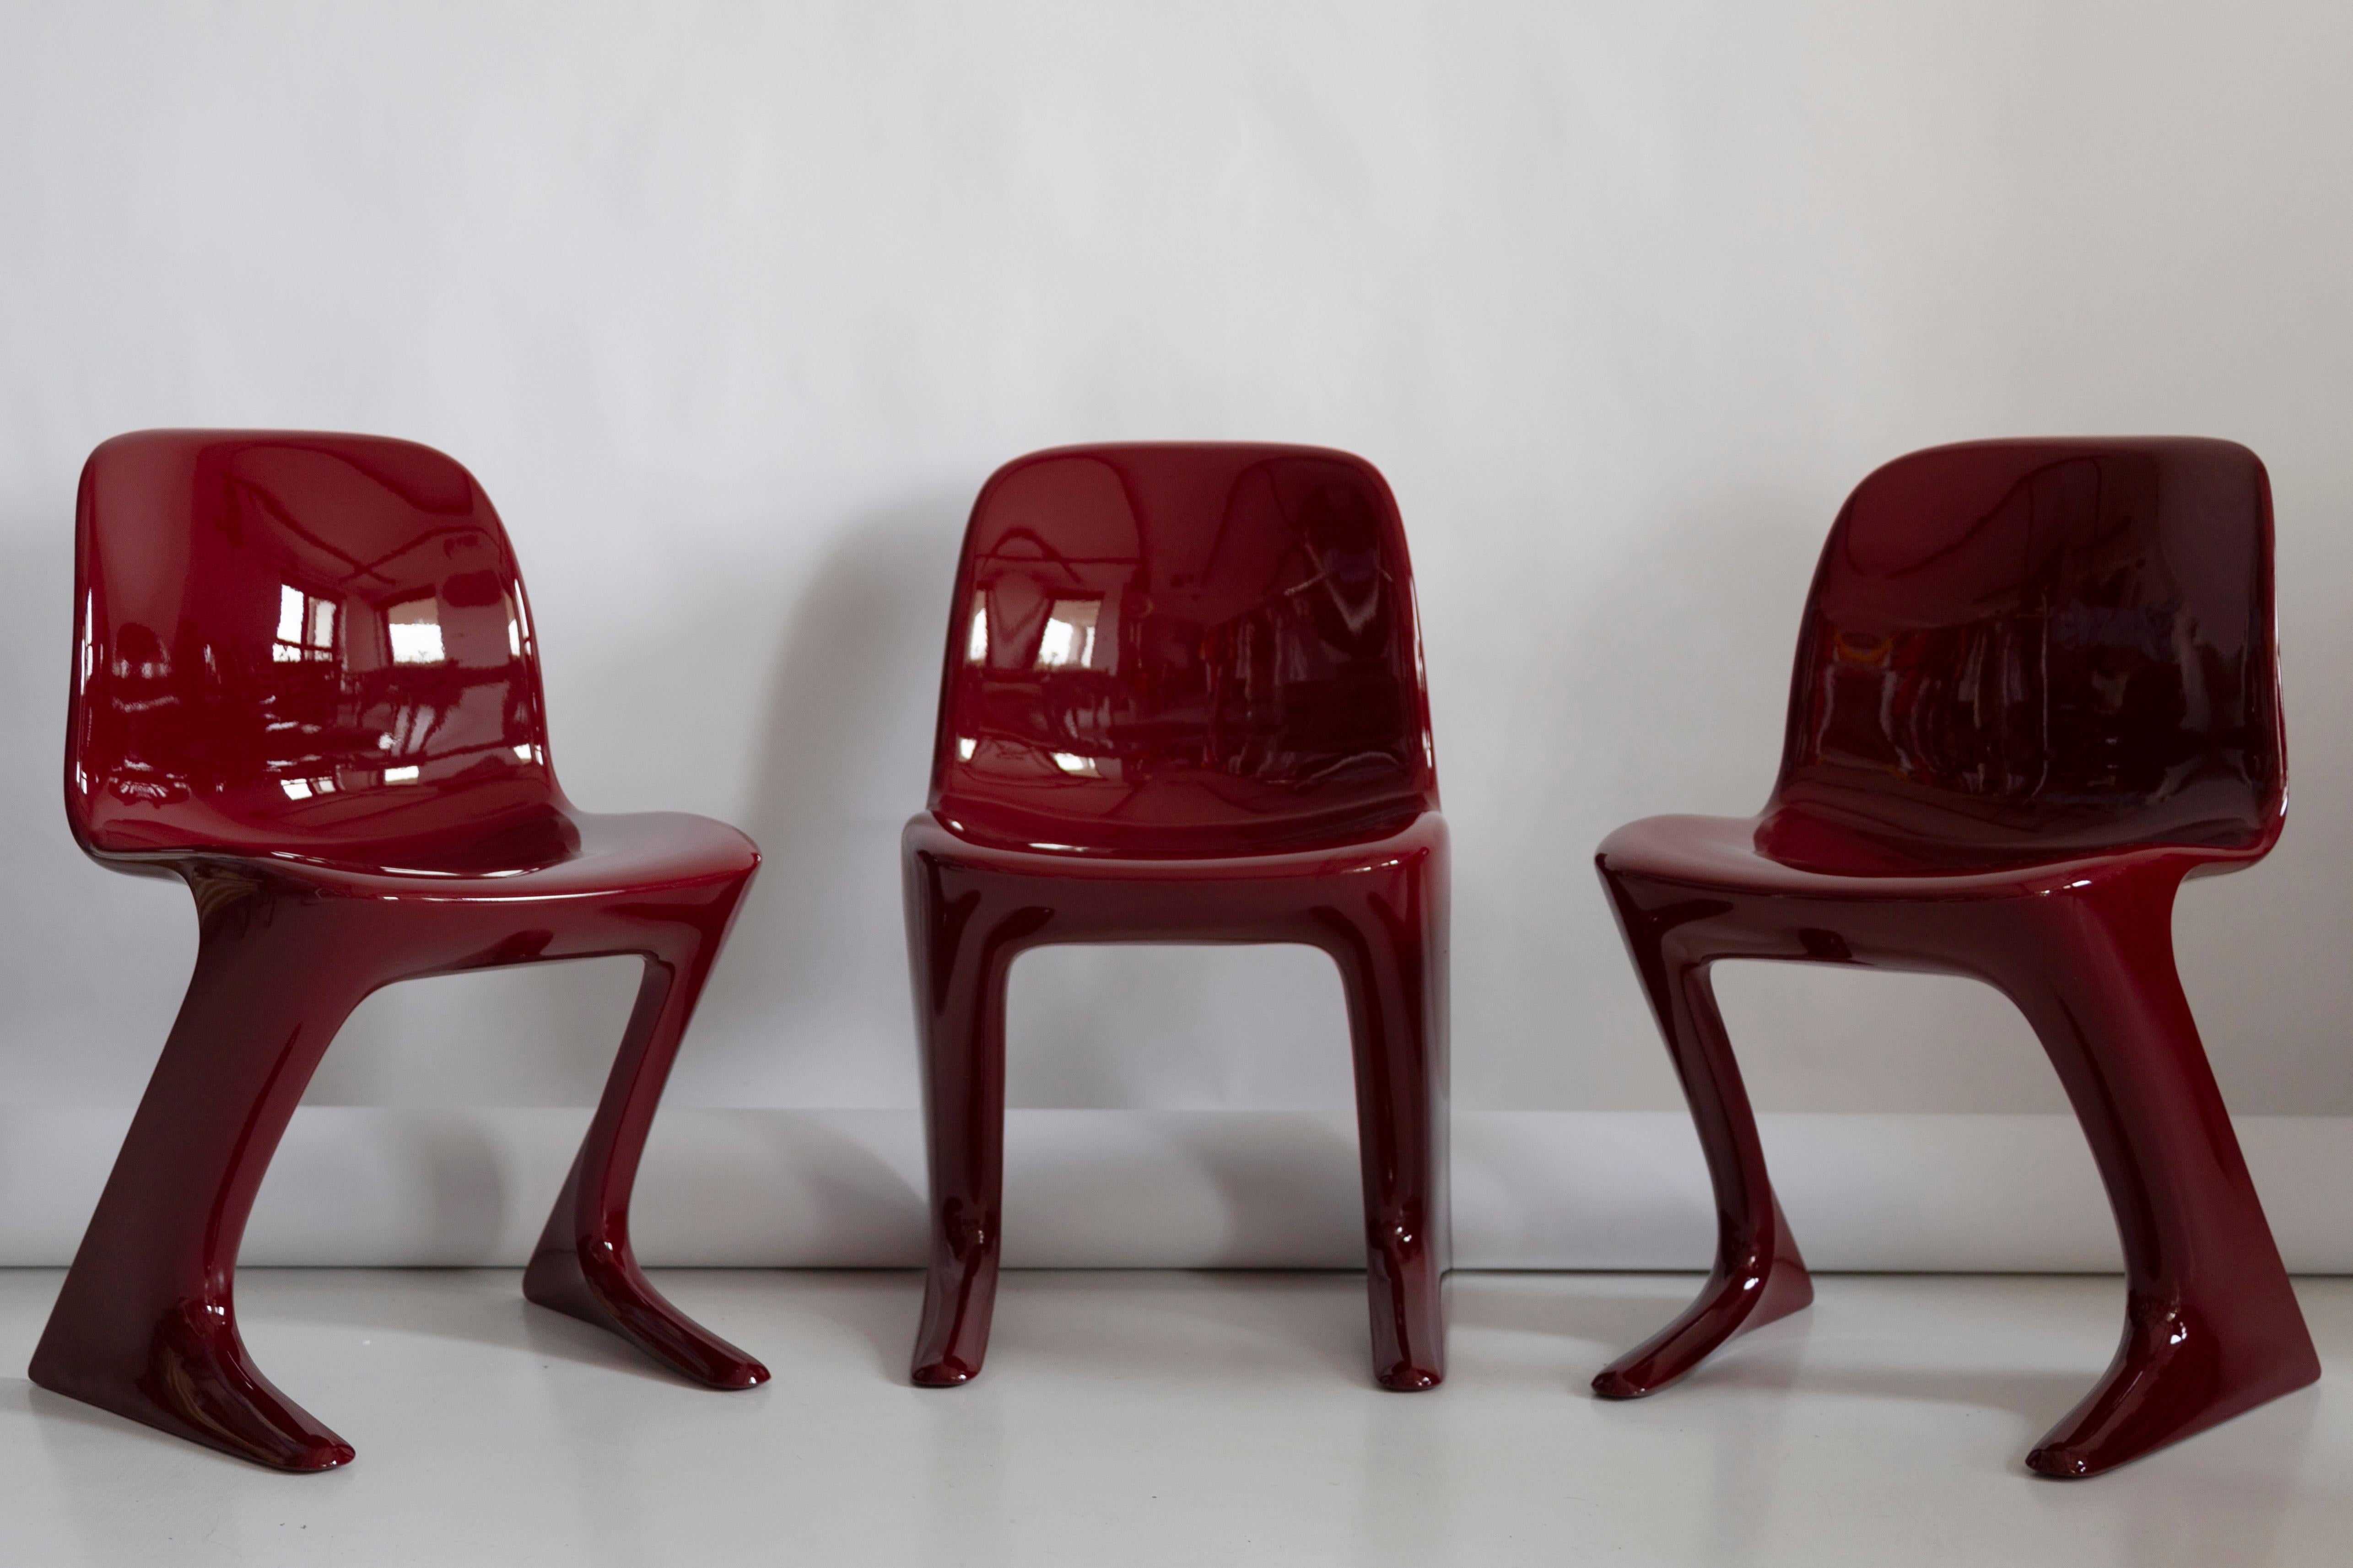 This model is called Z-chair. Designed in 1968 in the GDR by Ernst Moeckl and Siegfried Mehl, German Version of the Panton chair. Also called kangaroo chair or variopur chair. Produced in eastern Germany.

Chair is after full renovation, glossy red